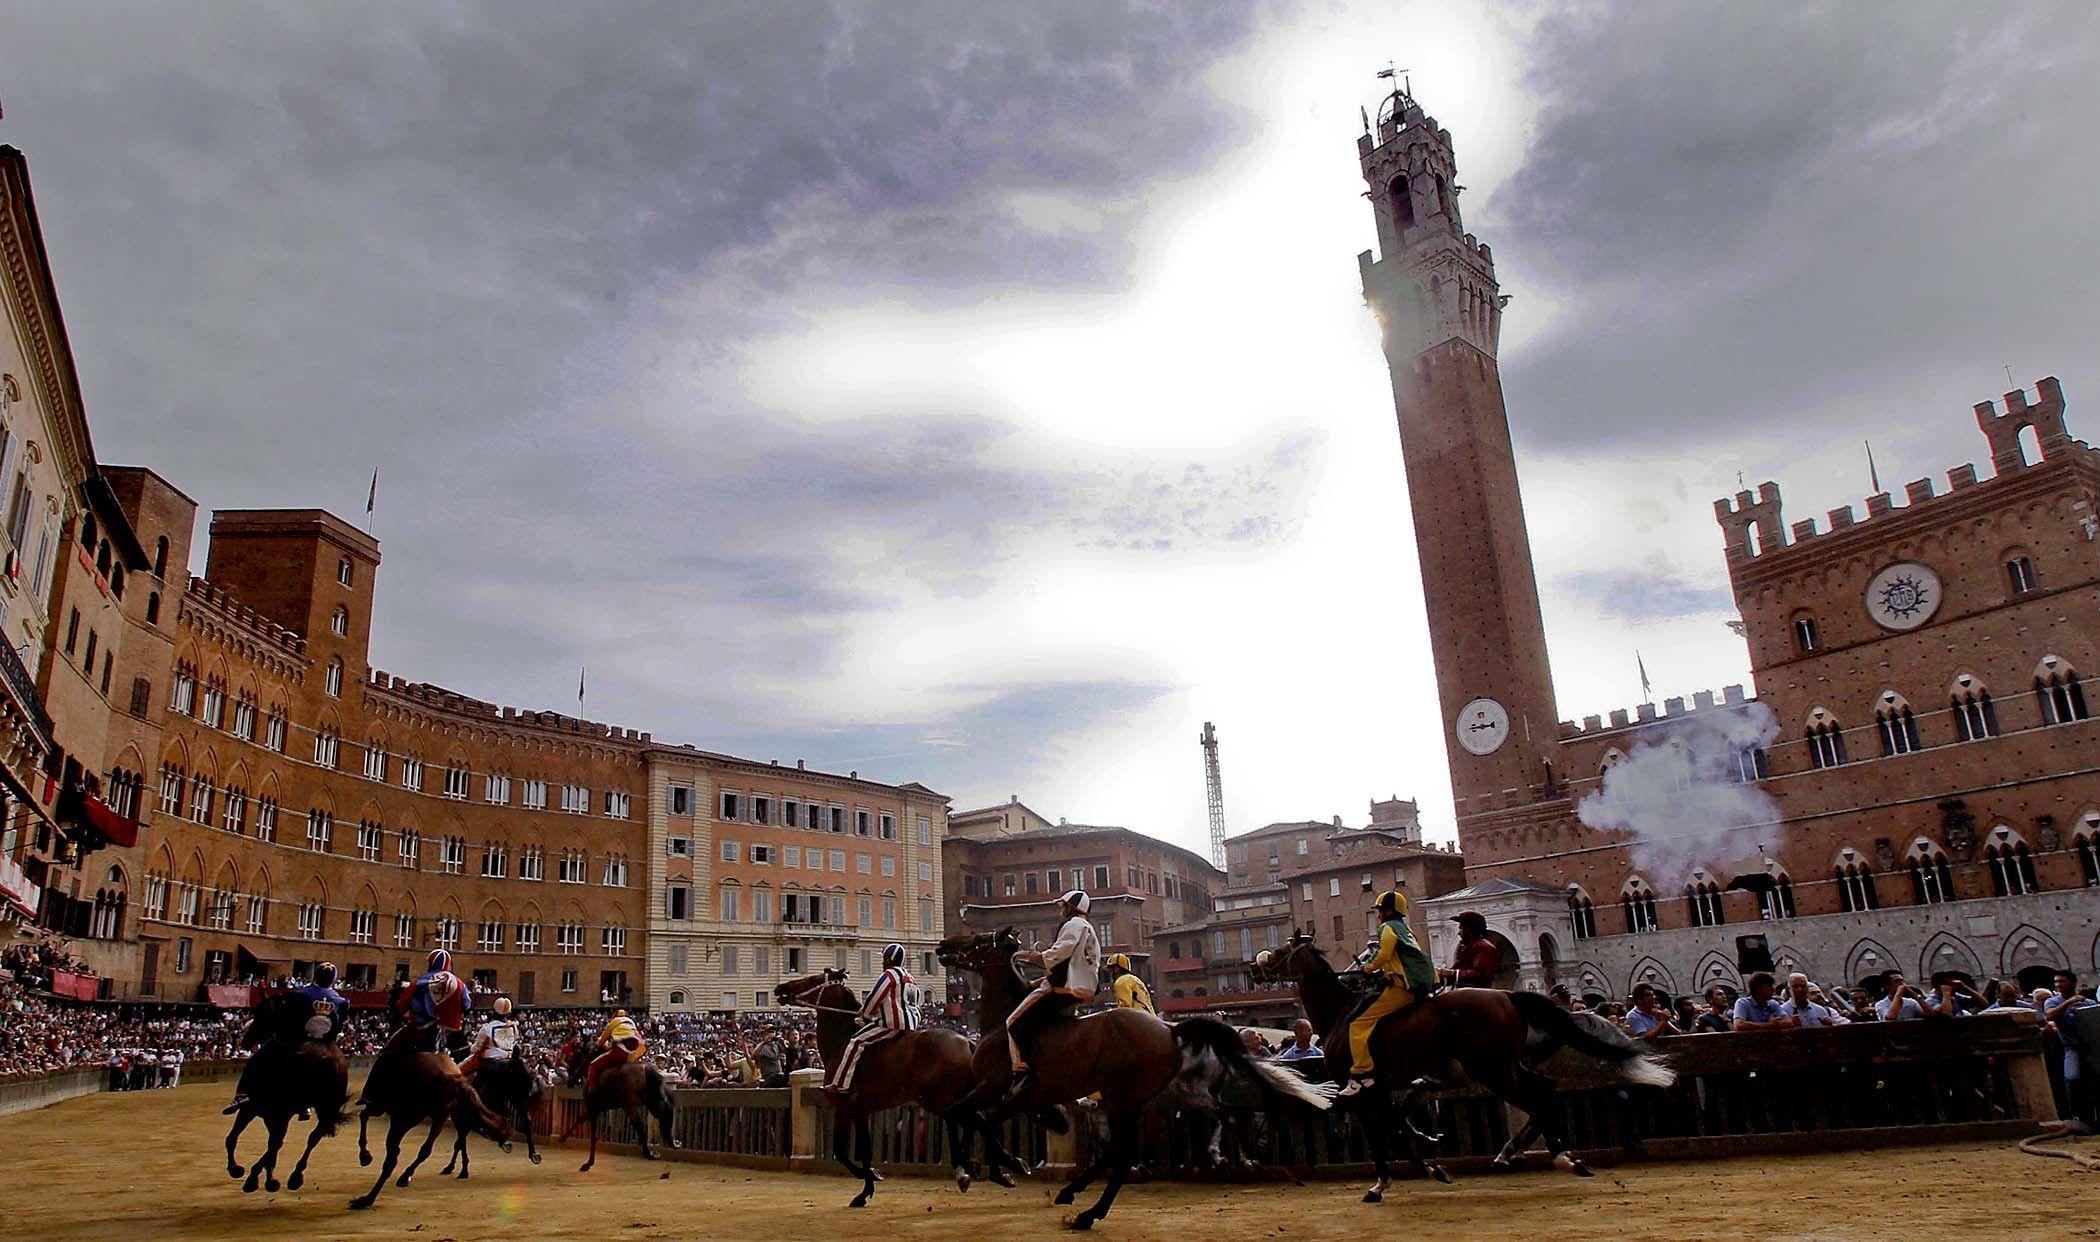 Medieval horse race in Siena, Italy wallpaper and image